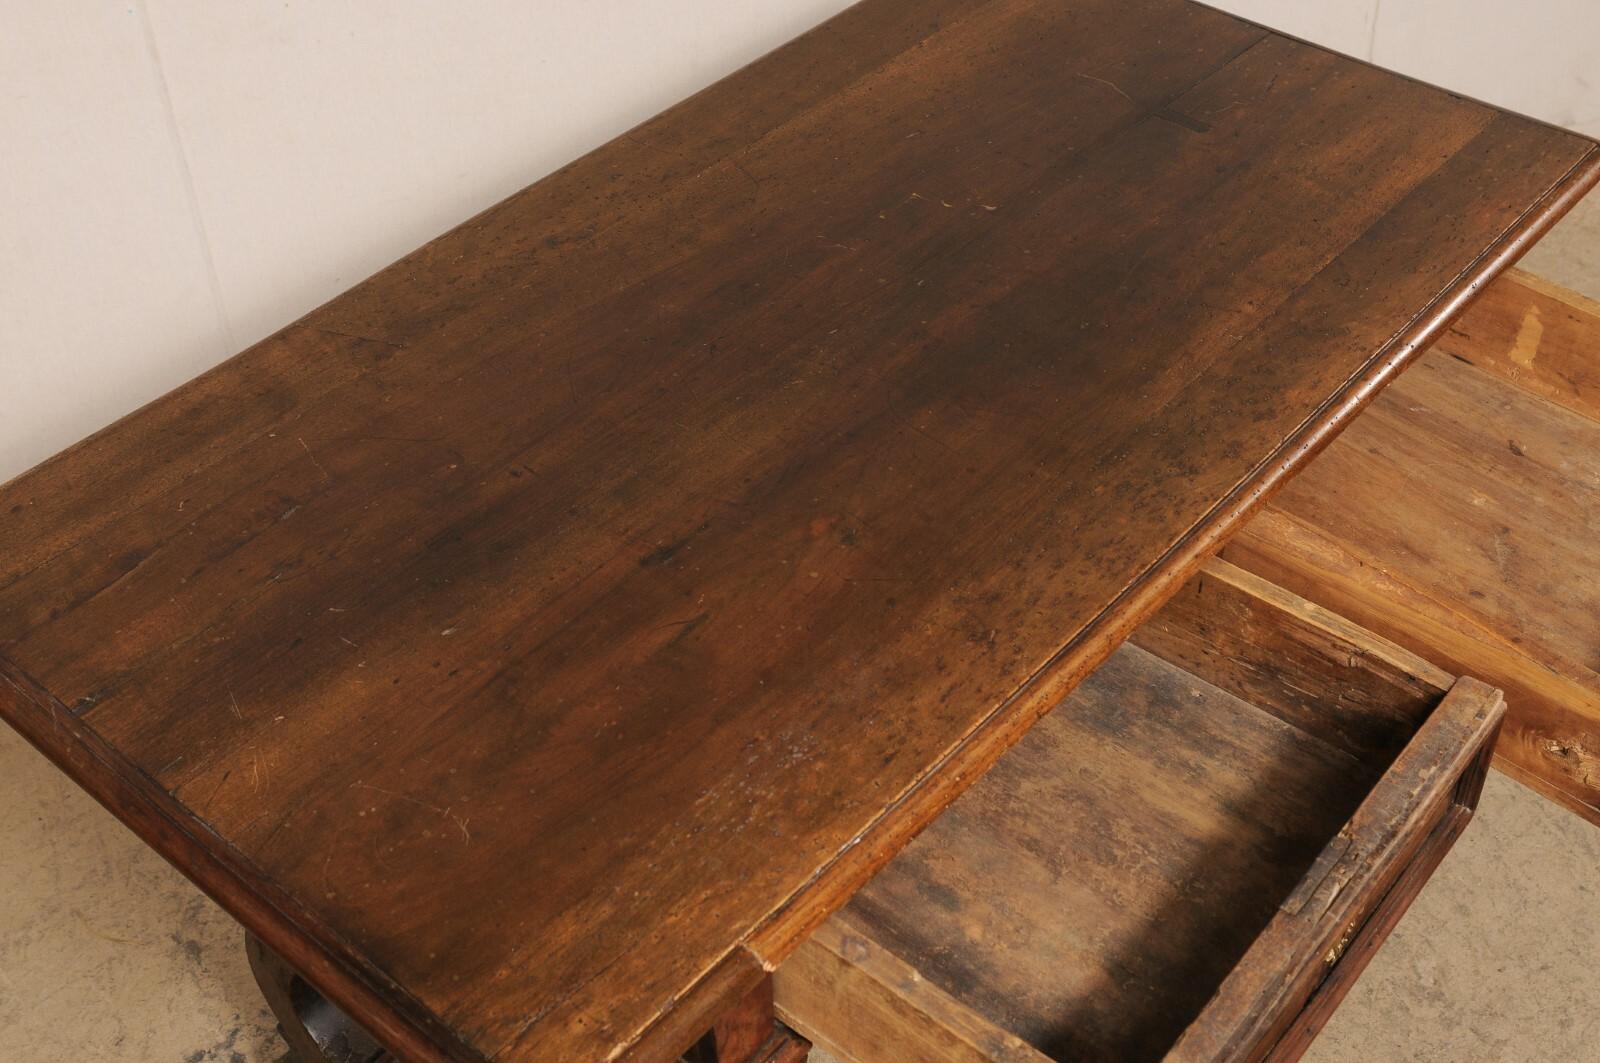 Wood Late 18th Century Italian Fratino Table w/Drawers & Forged Iron Stretcher For Sale